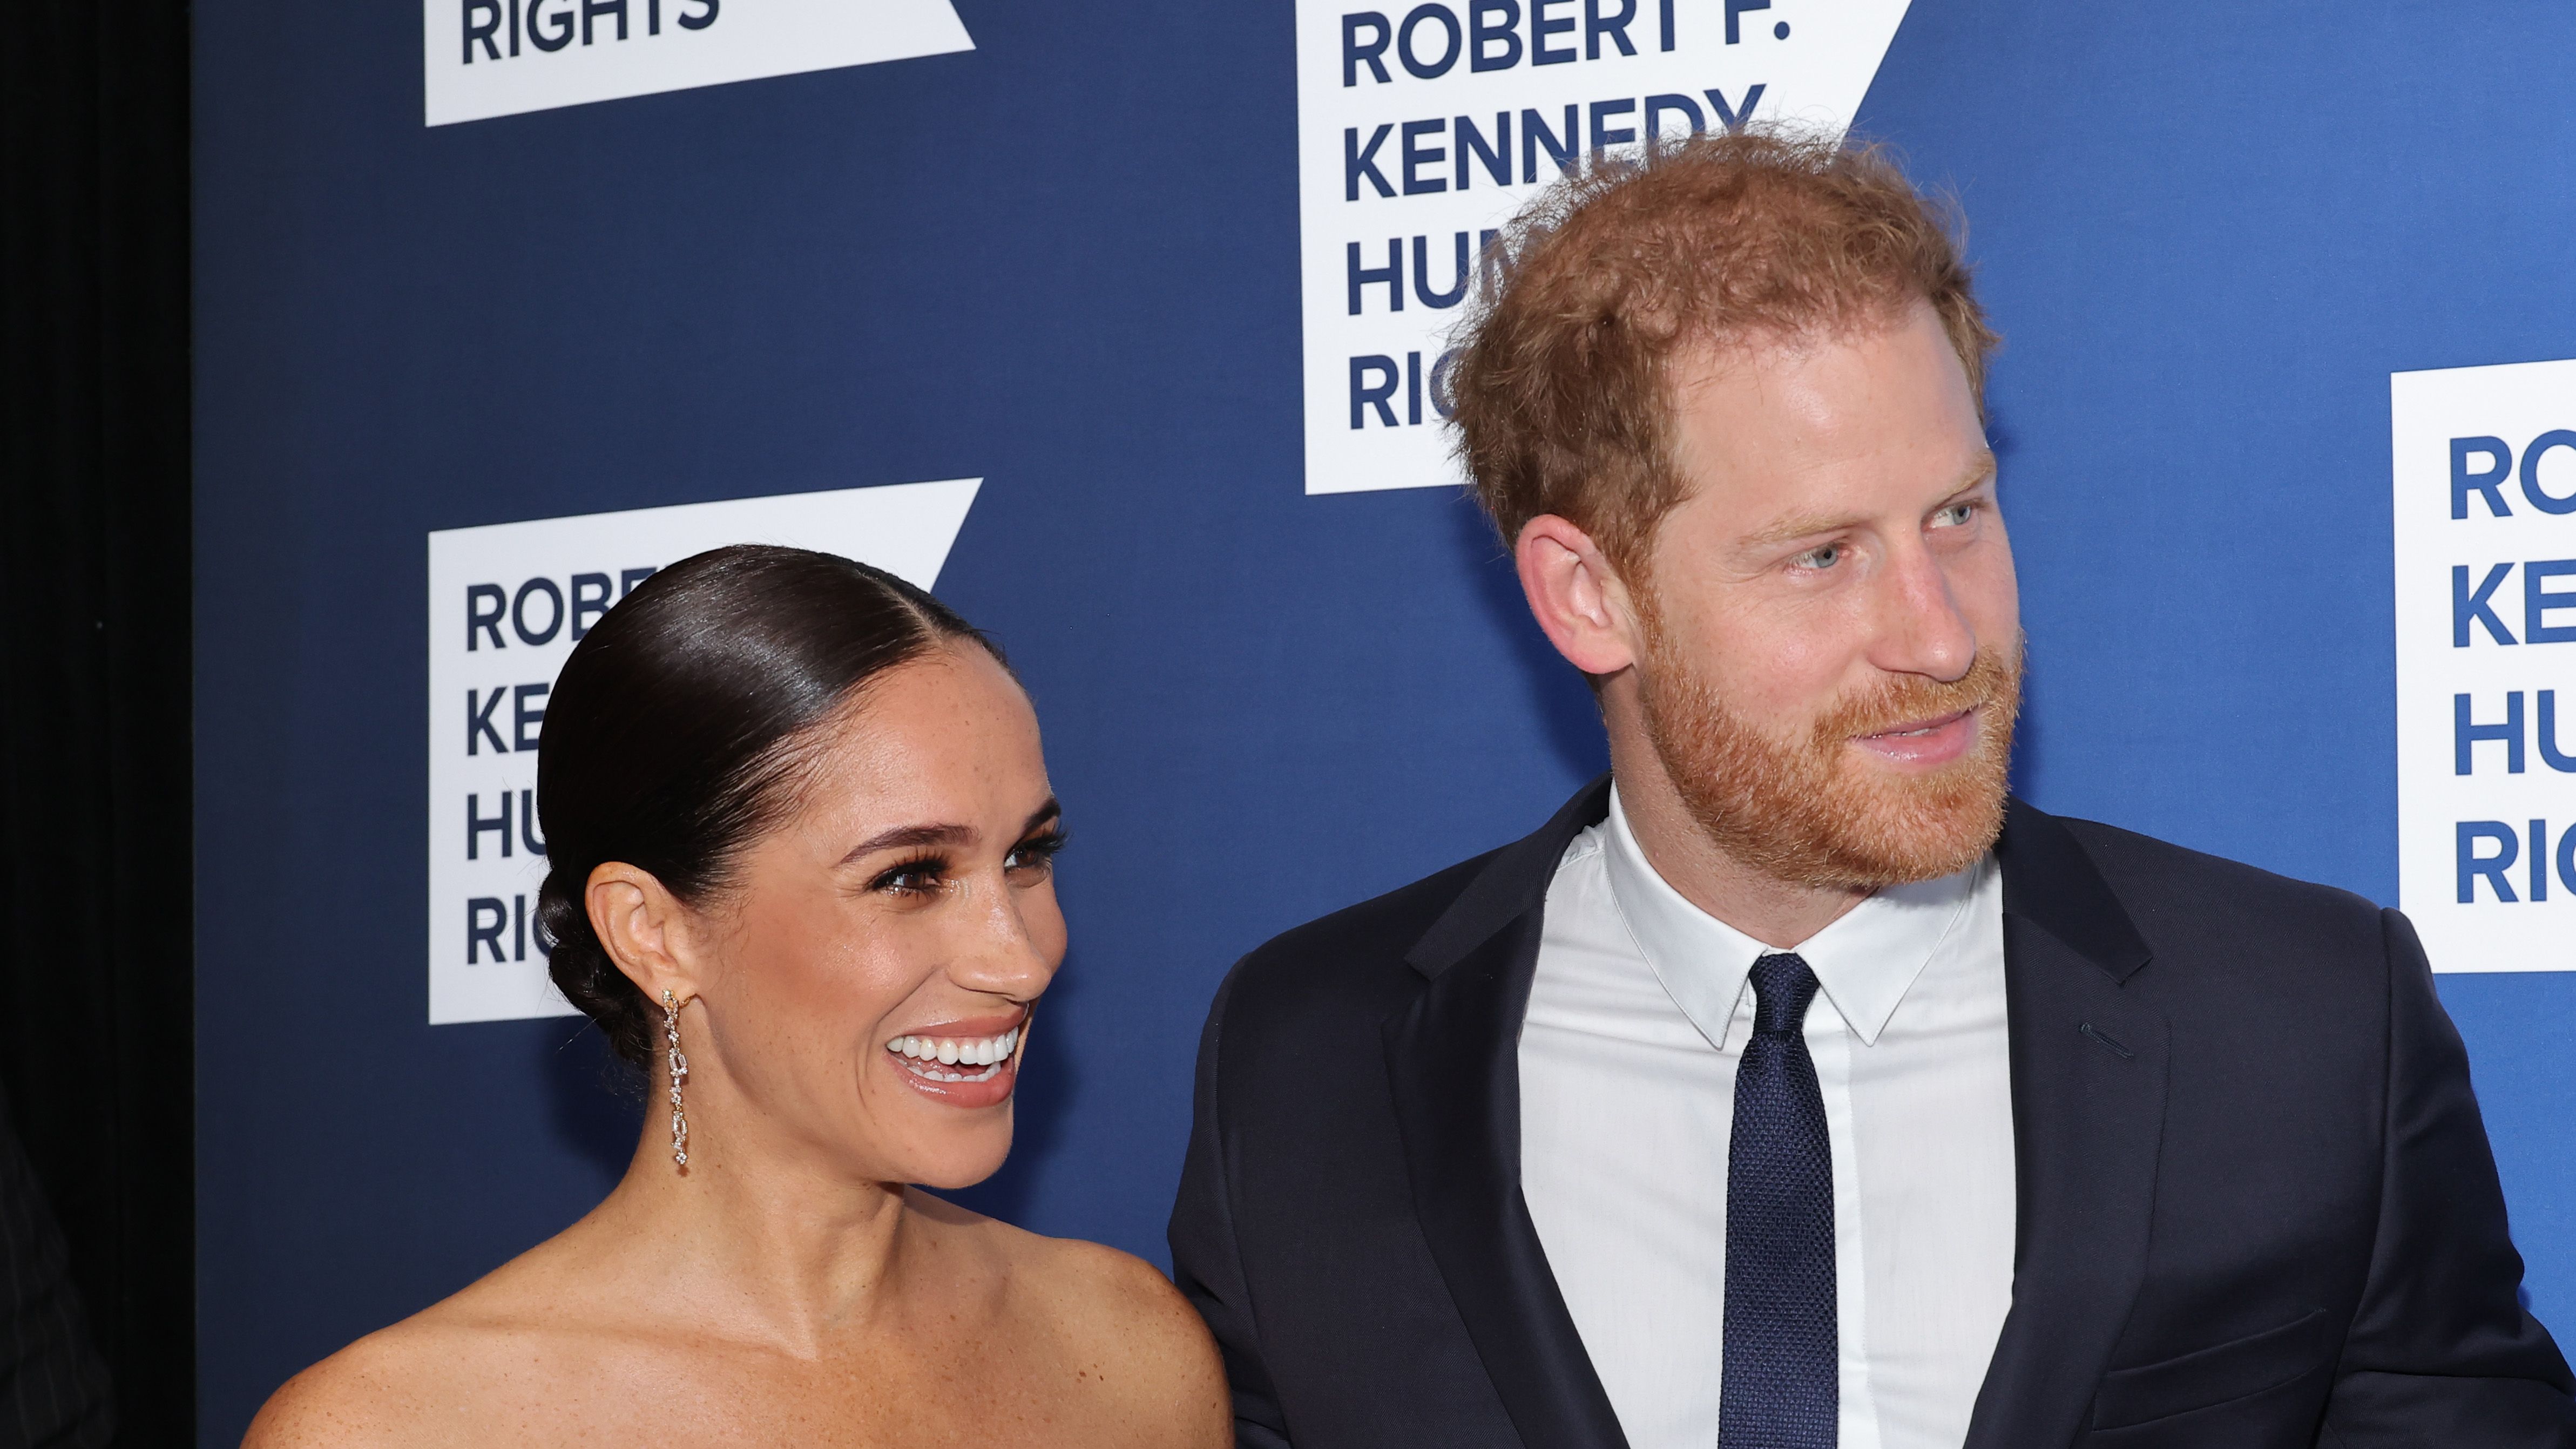 https://hips.hearstapps.com/hmg-prod/images/meghan-duchess-of-sussex-and-prince-harry-duke-of-sussex-news-photo-1670427593.jpg?crop=1xw:0.72906xh;center,top